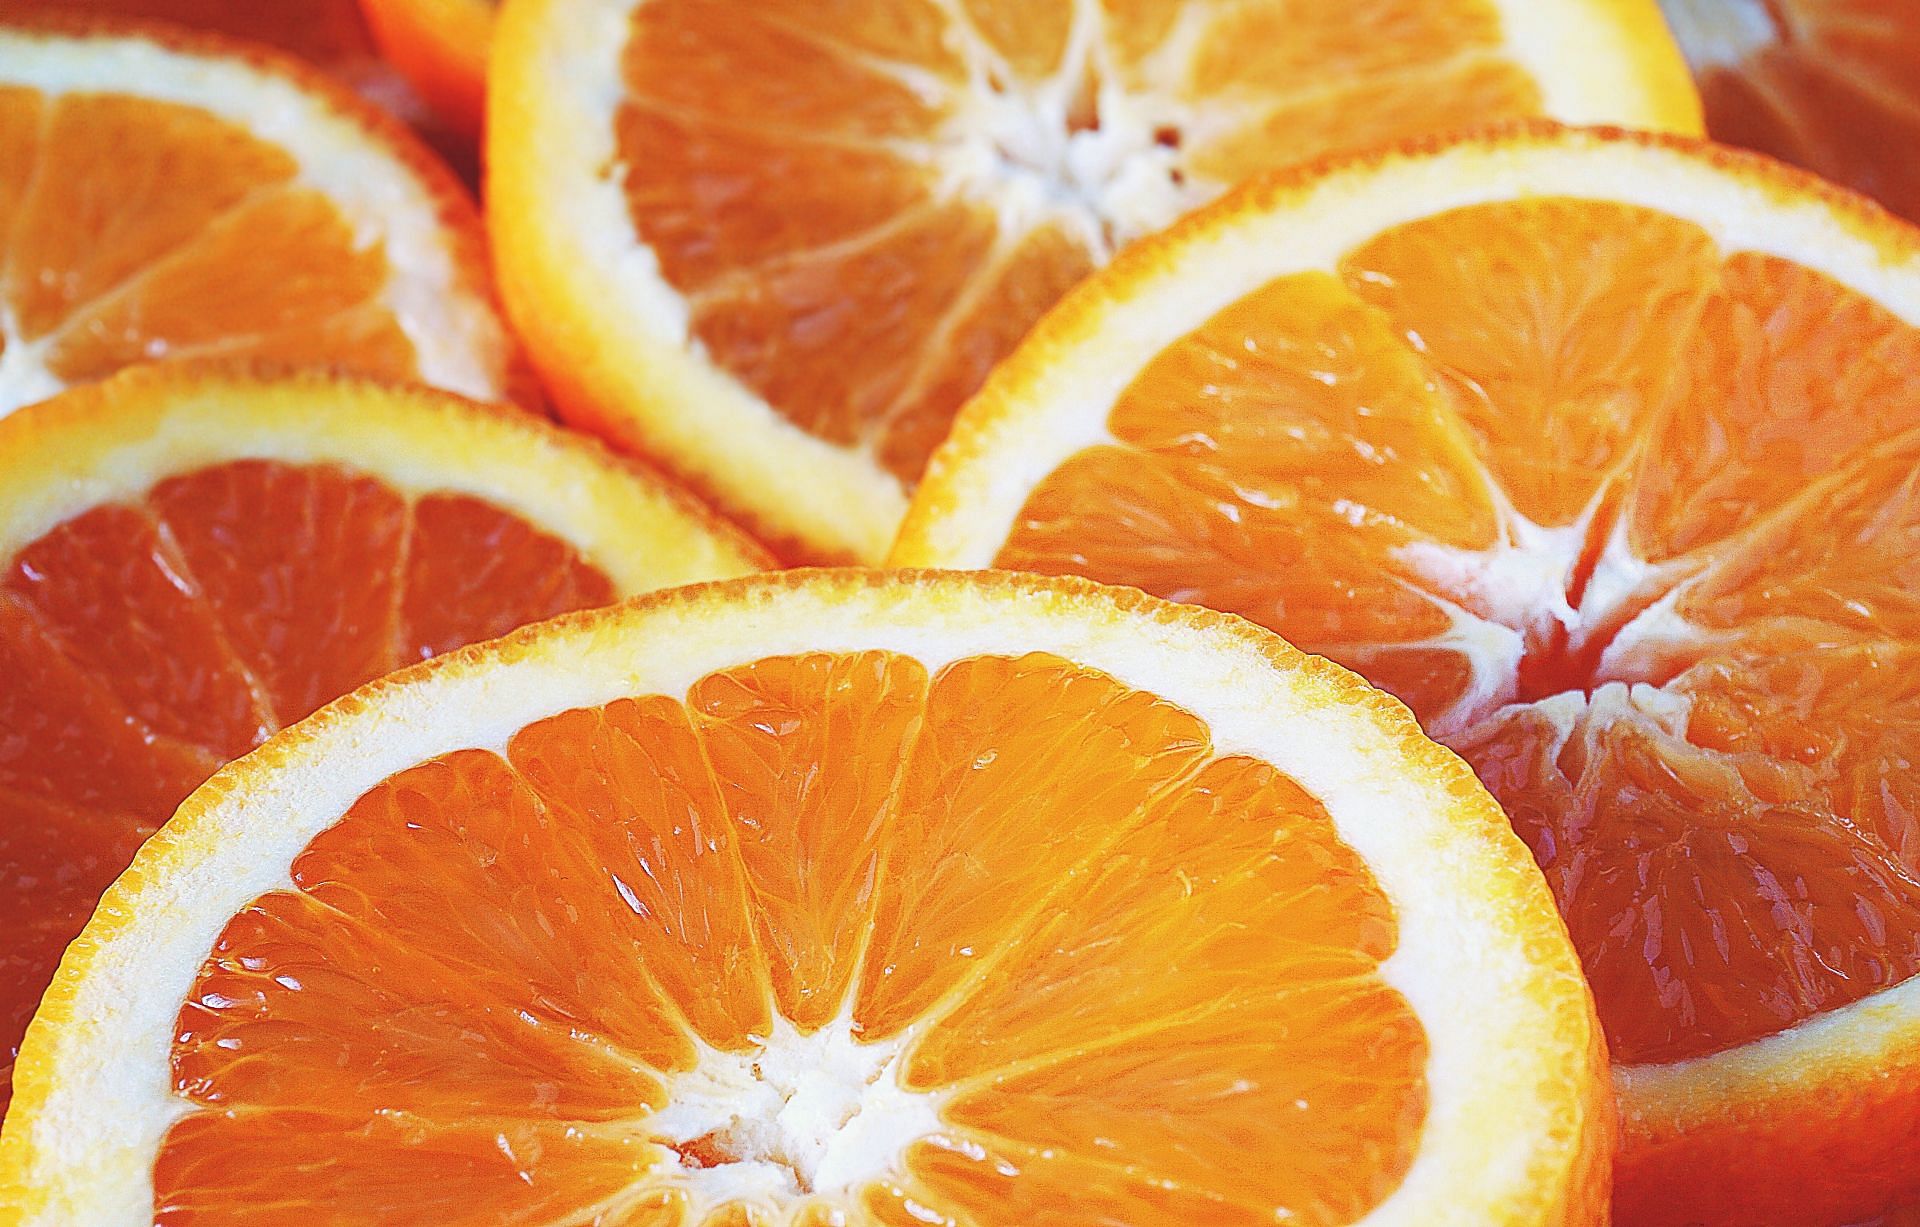 Oranges as brain foods (image sourced via Pexels / Photo by suzy)